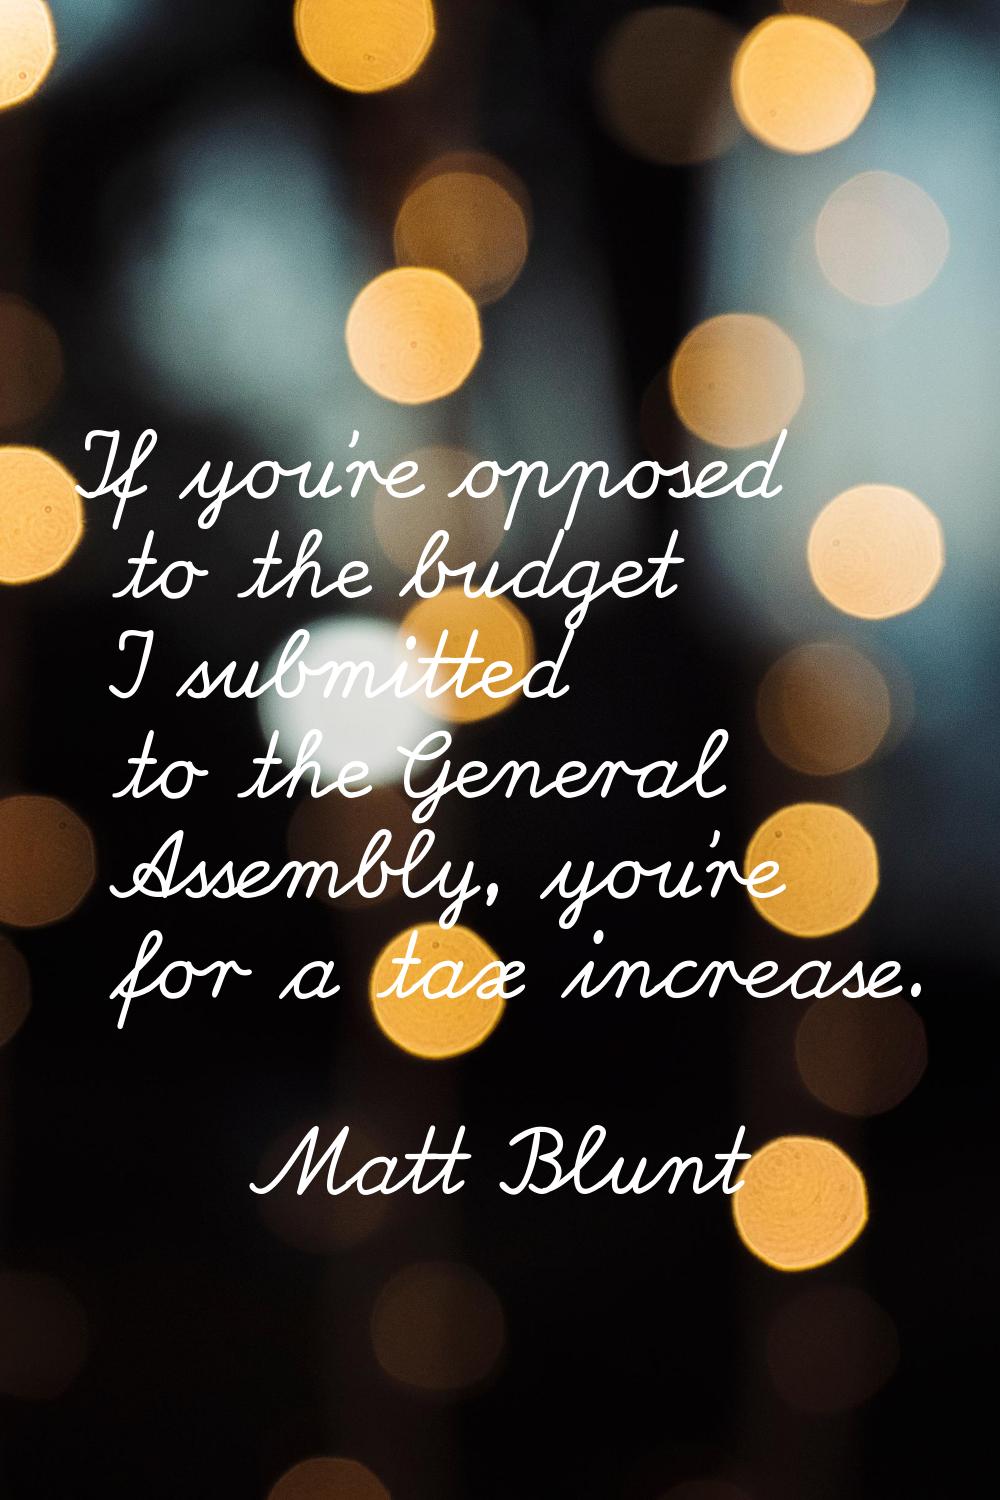 If you're opposed to the budget I submitted to the General Assembly, you're for a tax increase.